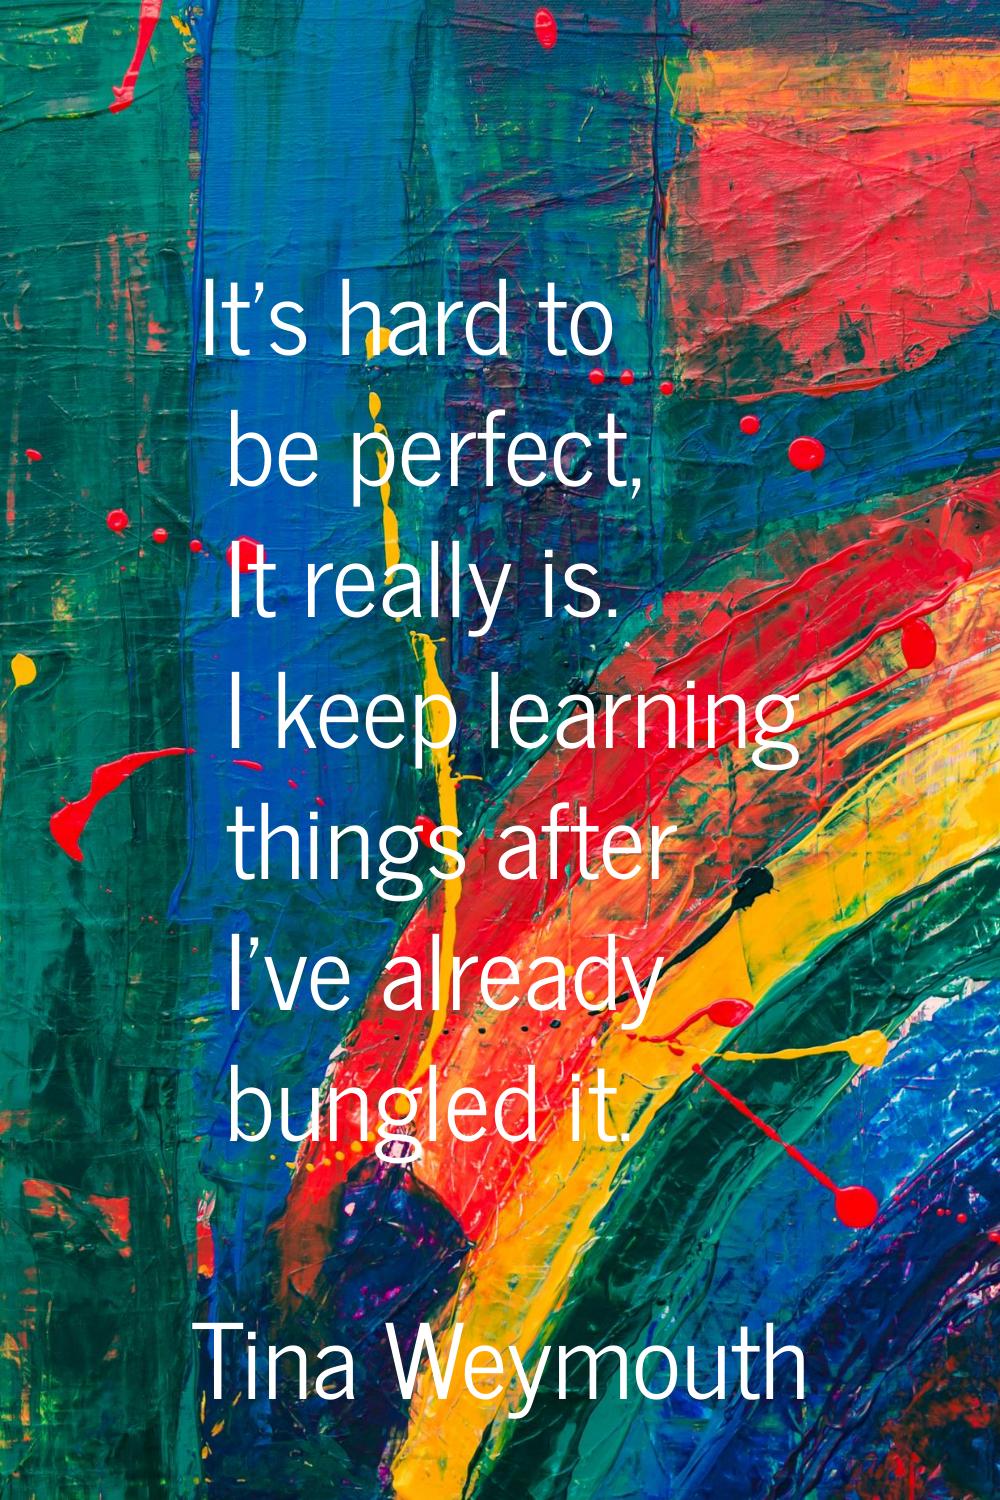 It's hard to be perfect, It really is. I keep learning things after I've already bungled it.